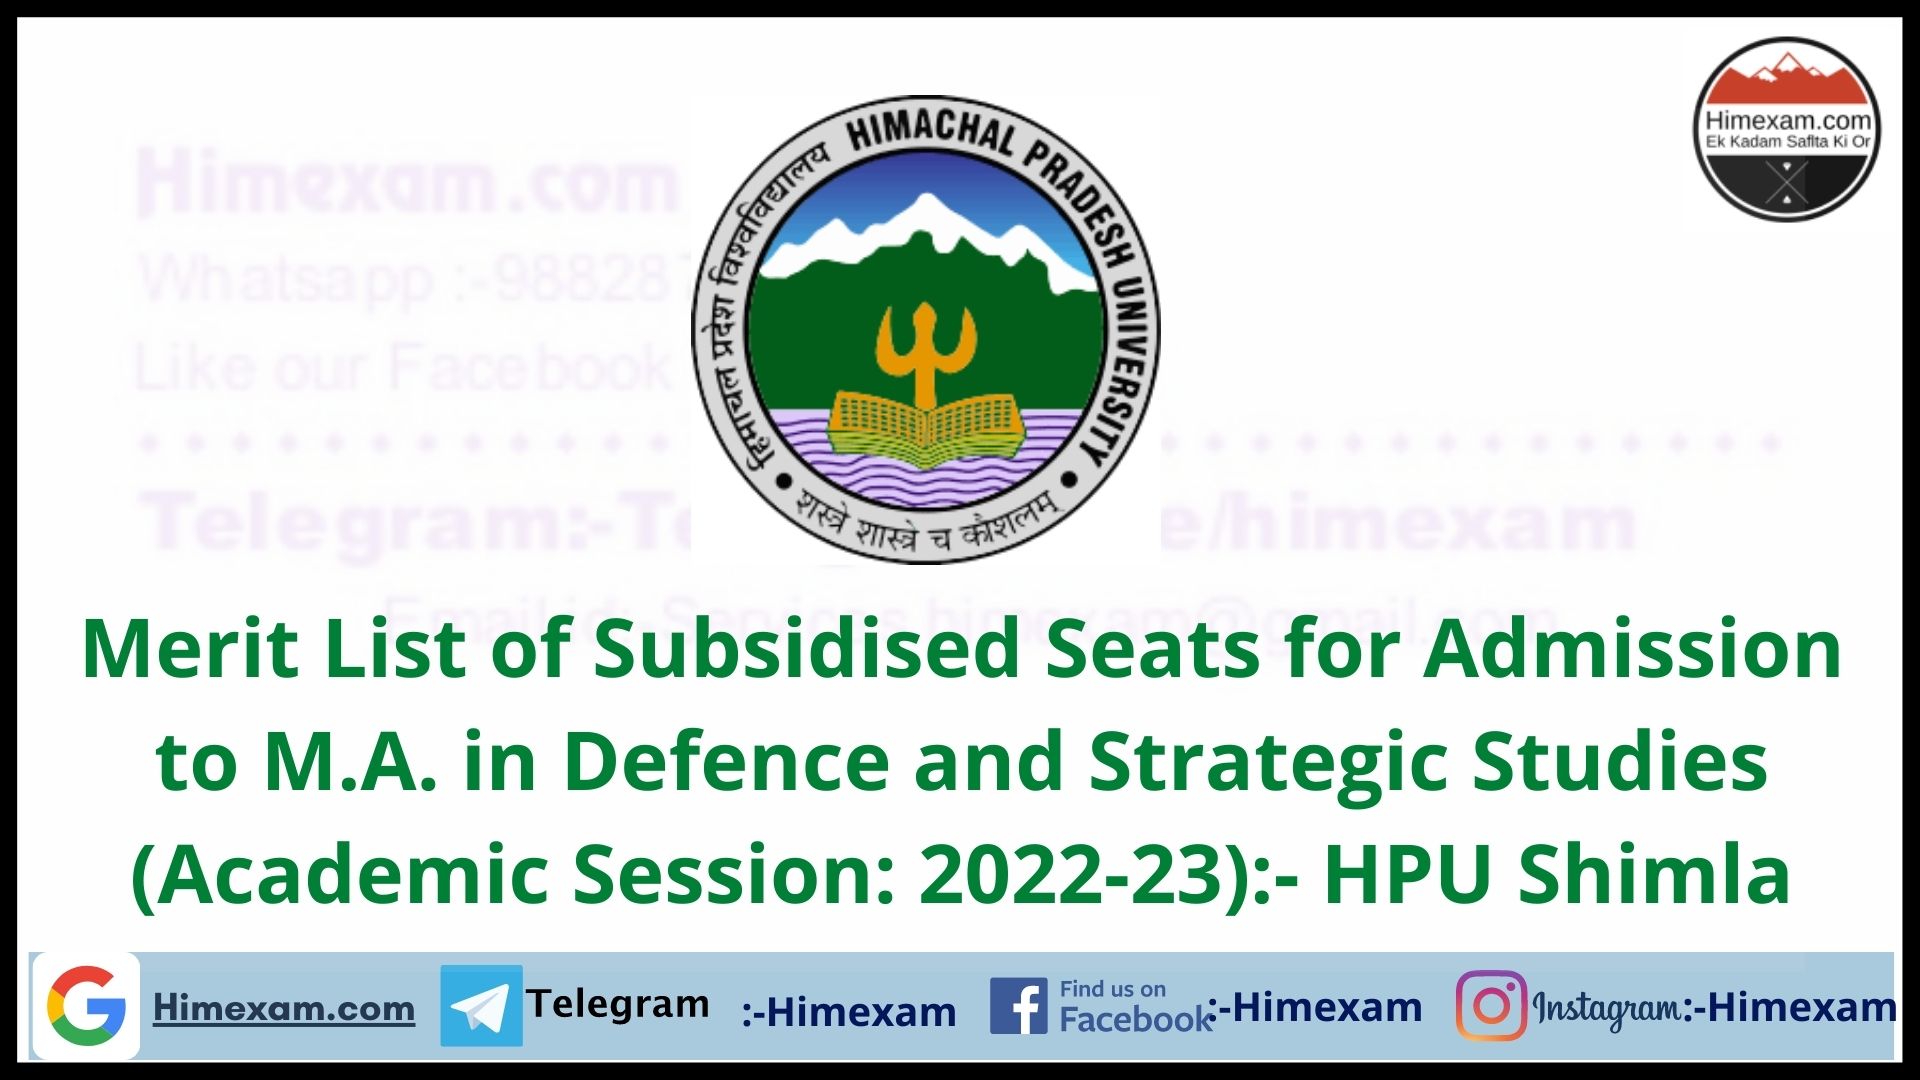 Merit List of Subsidised Seats for Admission to M.A. in Defence and Strategic Studies (Academic Session: 2022-23):- HPU Shimla